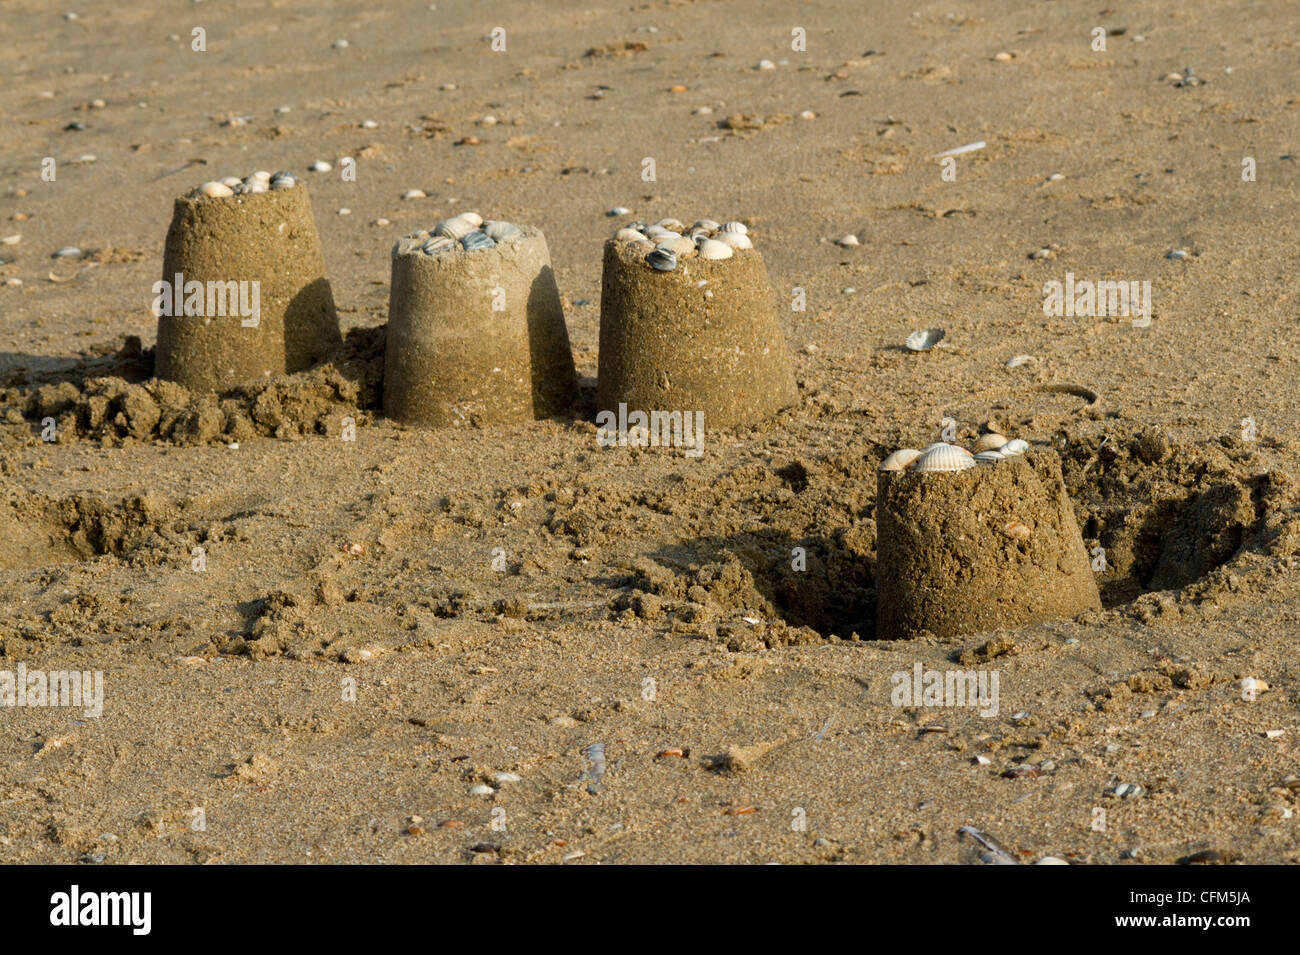 Sandcastles decorated with seashells Stock Photo